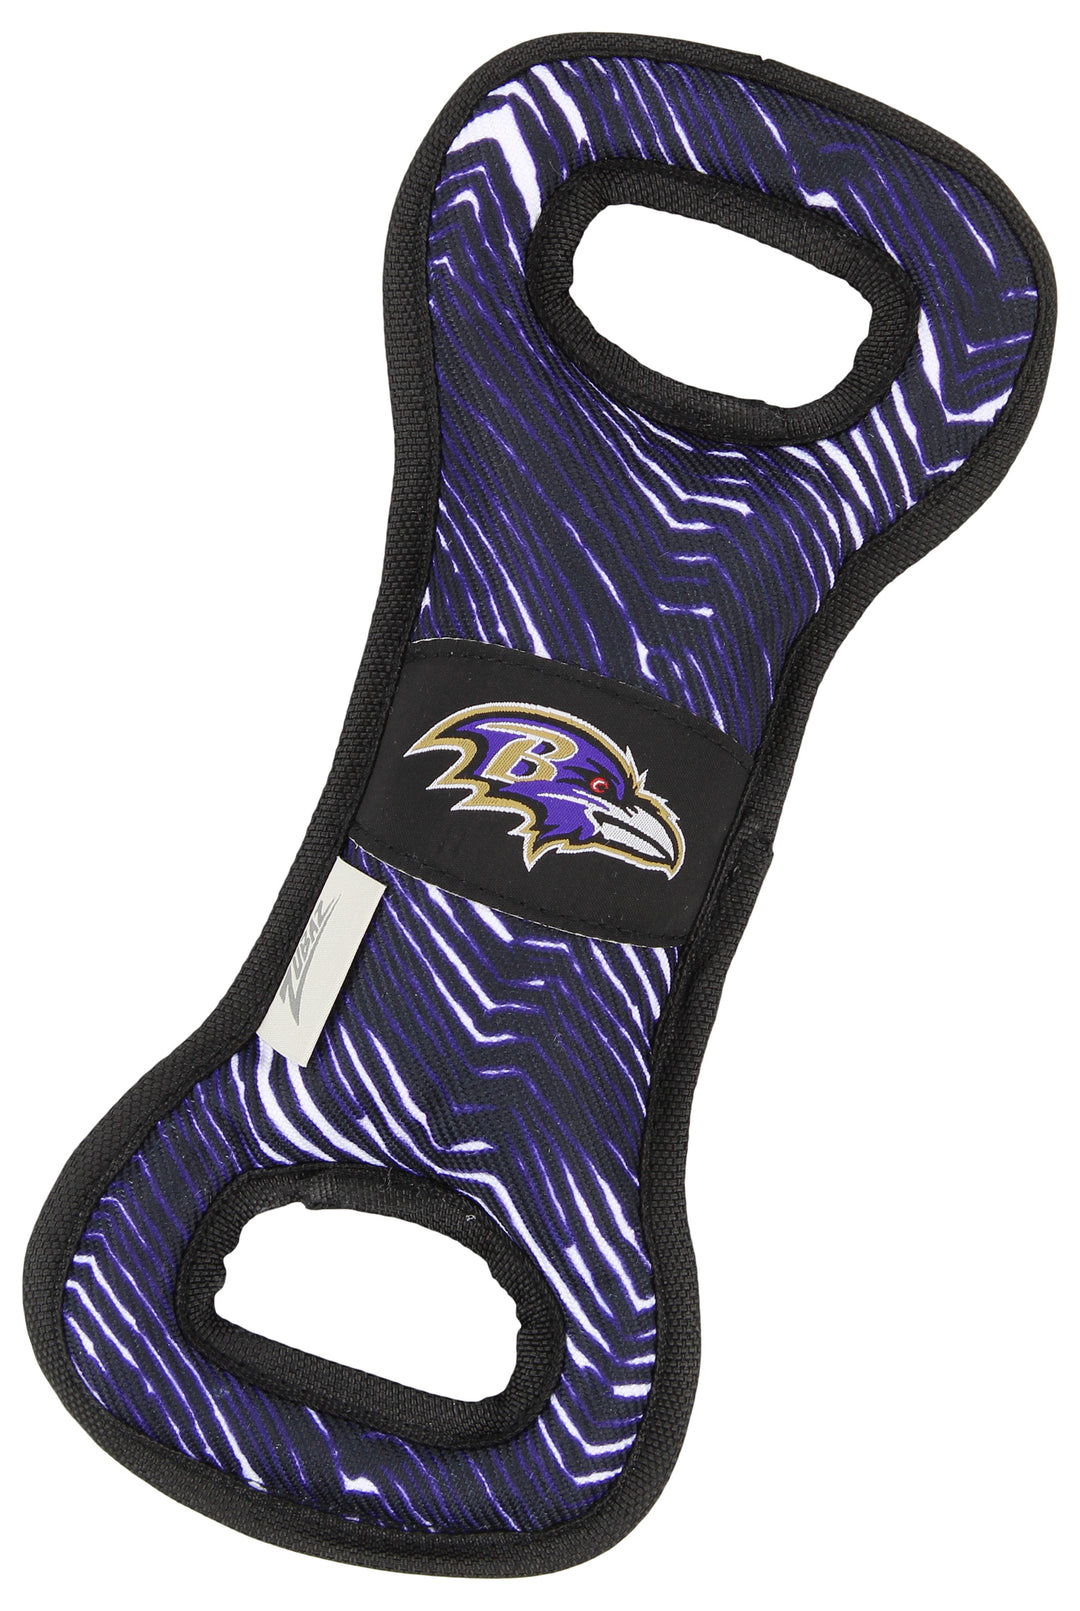 Zubaz X Pets First NFL Baltimore Ravens Team Logo Dog Tug Toy with Squeaker